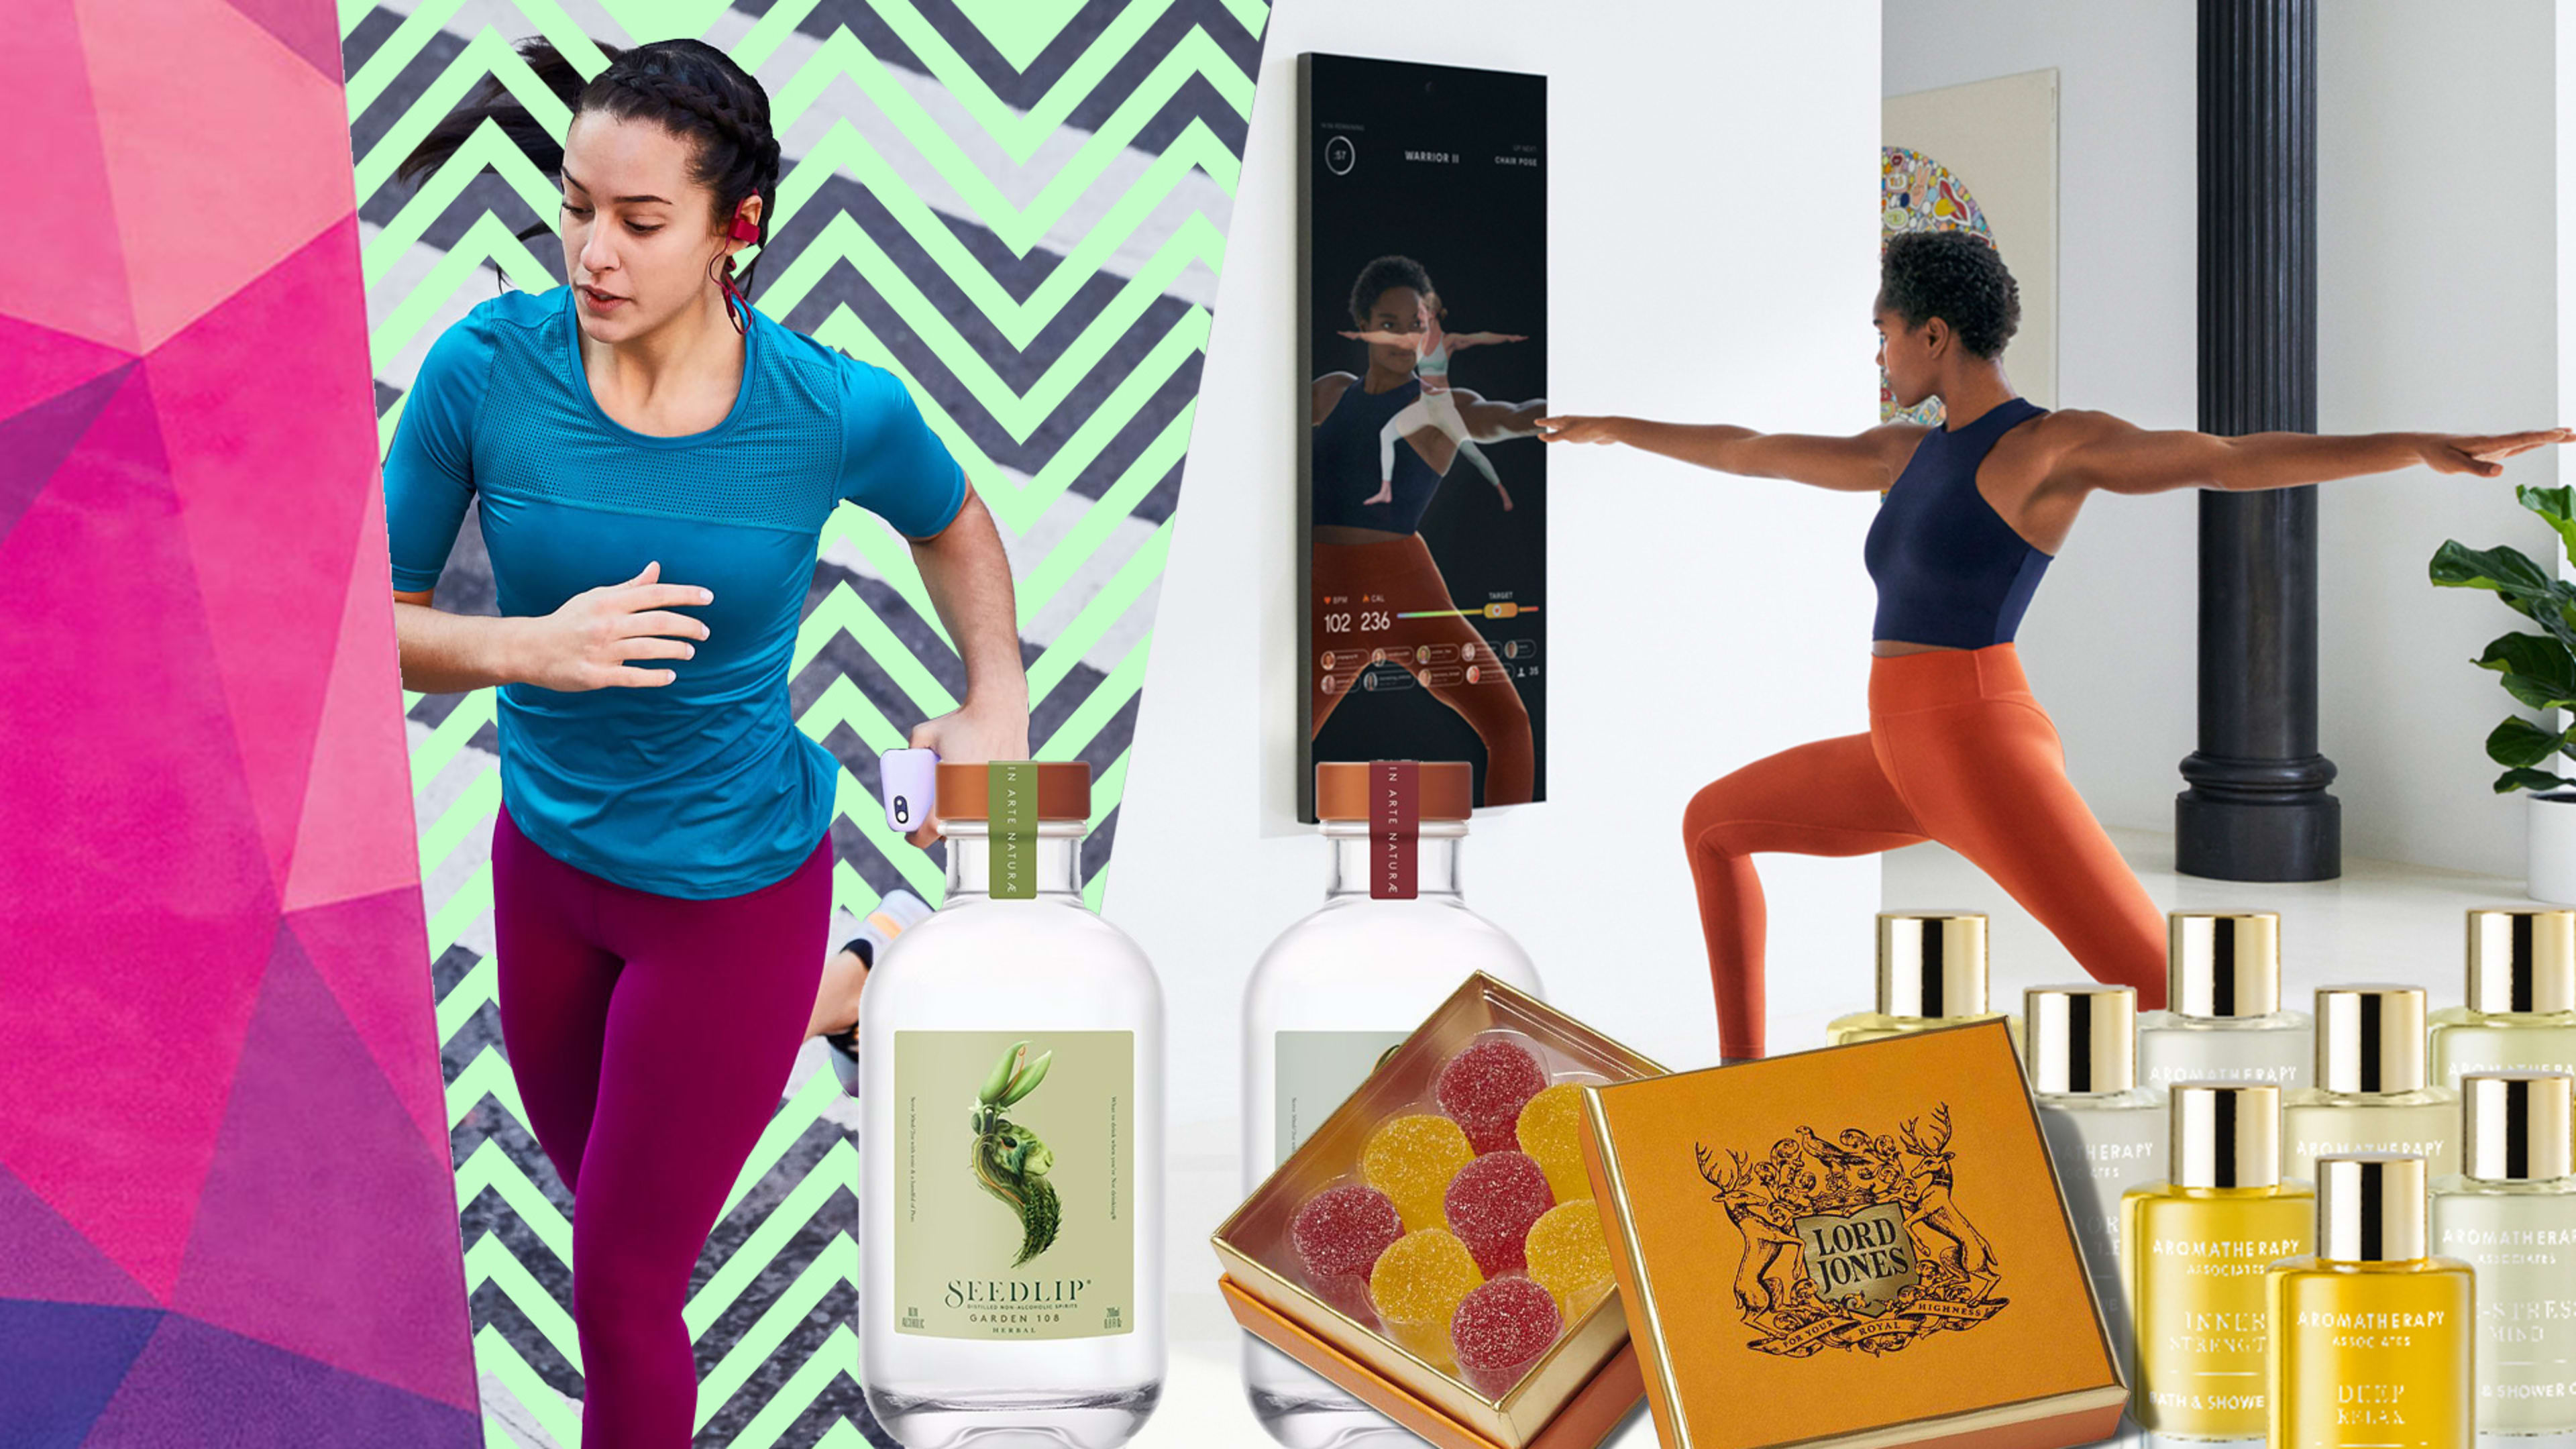 10 products for taking better care of yourself in the New Year